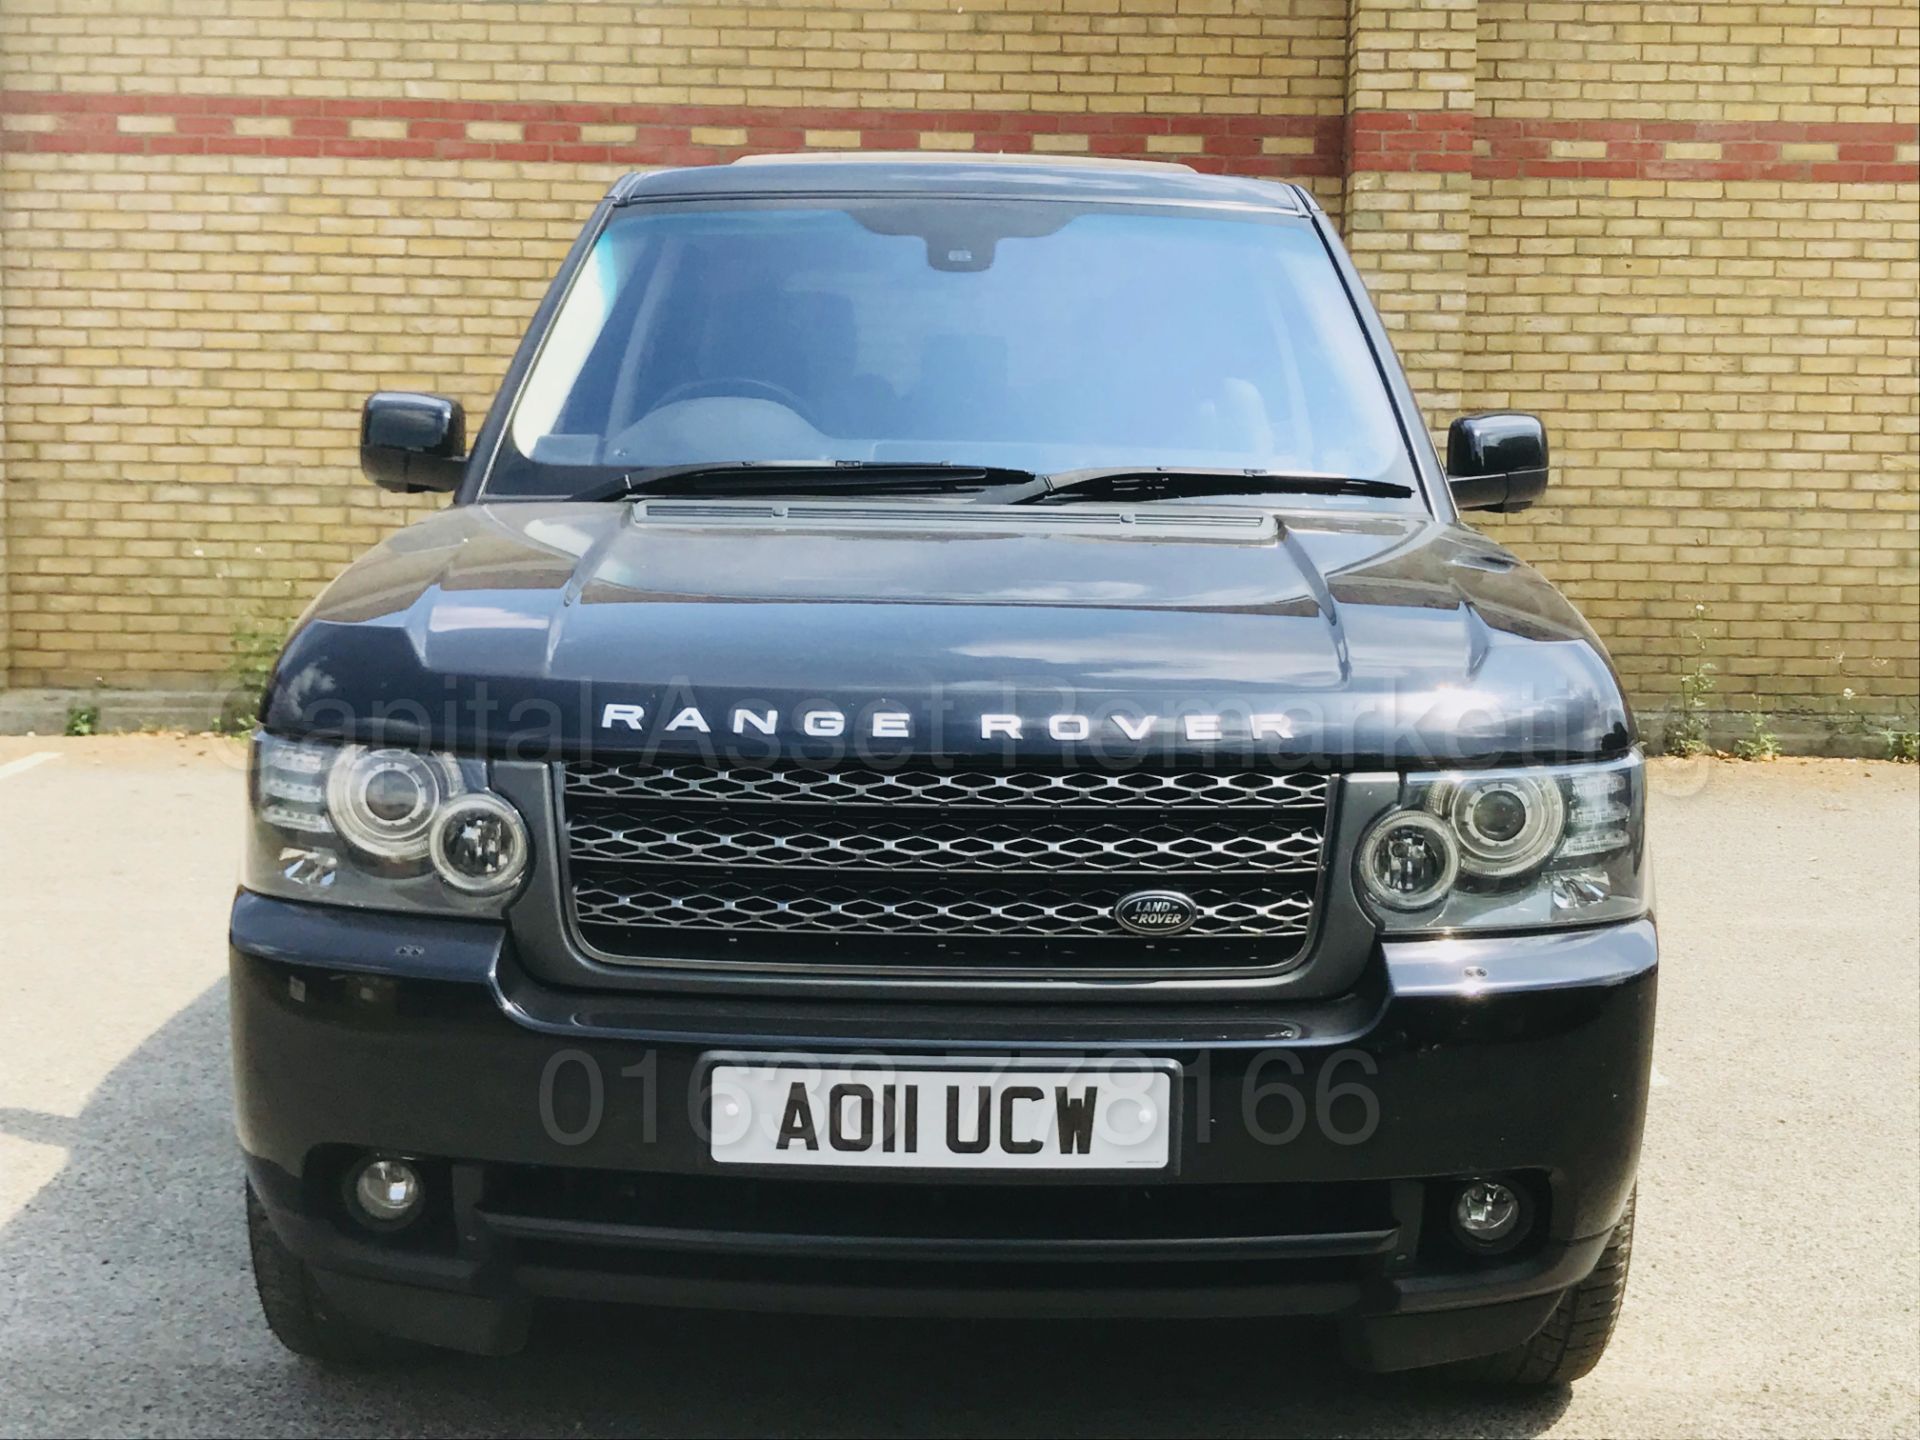 (On Sale) RANGE ROVER VOGUE SE (2011) 'TDV8 -8 SPEED AUTO' **FULLY LOADED** (1 OWNER - FULL HISTORY) - Image 15 of 60